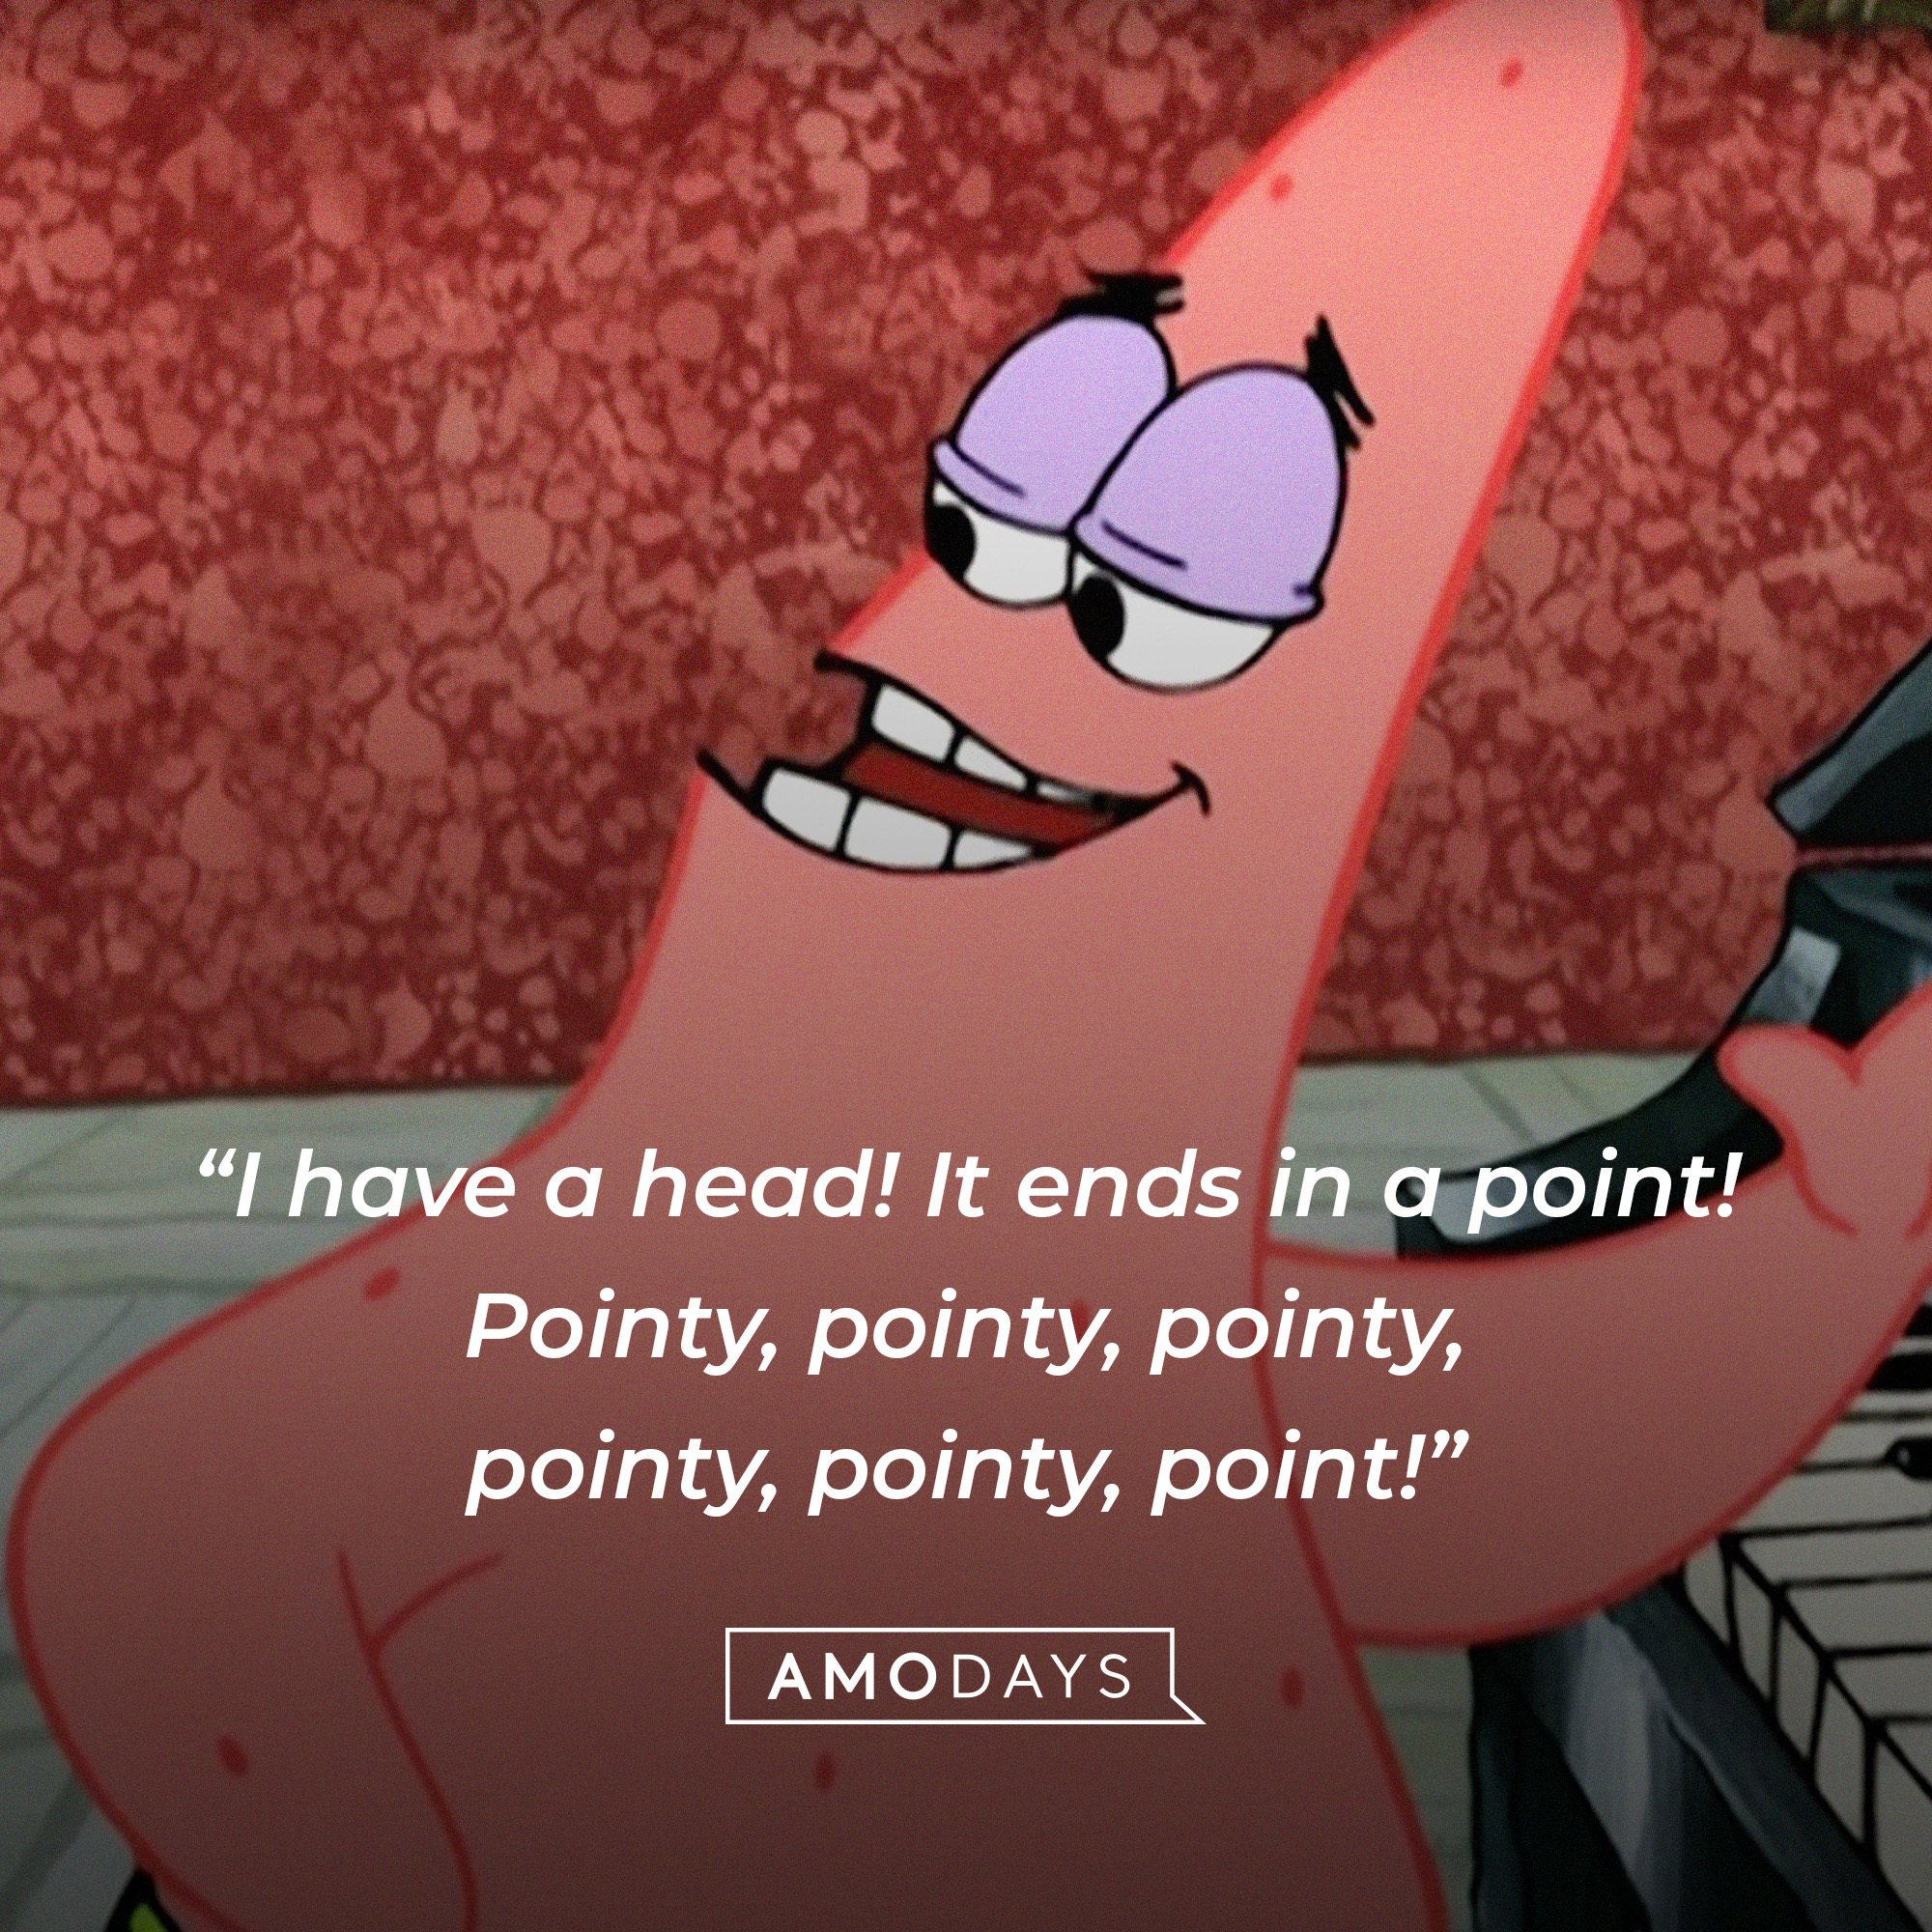 Patrick Star’s quote: “I have a head! It ends in a point! Pointy, pointy, pointy, pointy, pointy, point!” | Image: AmoDays